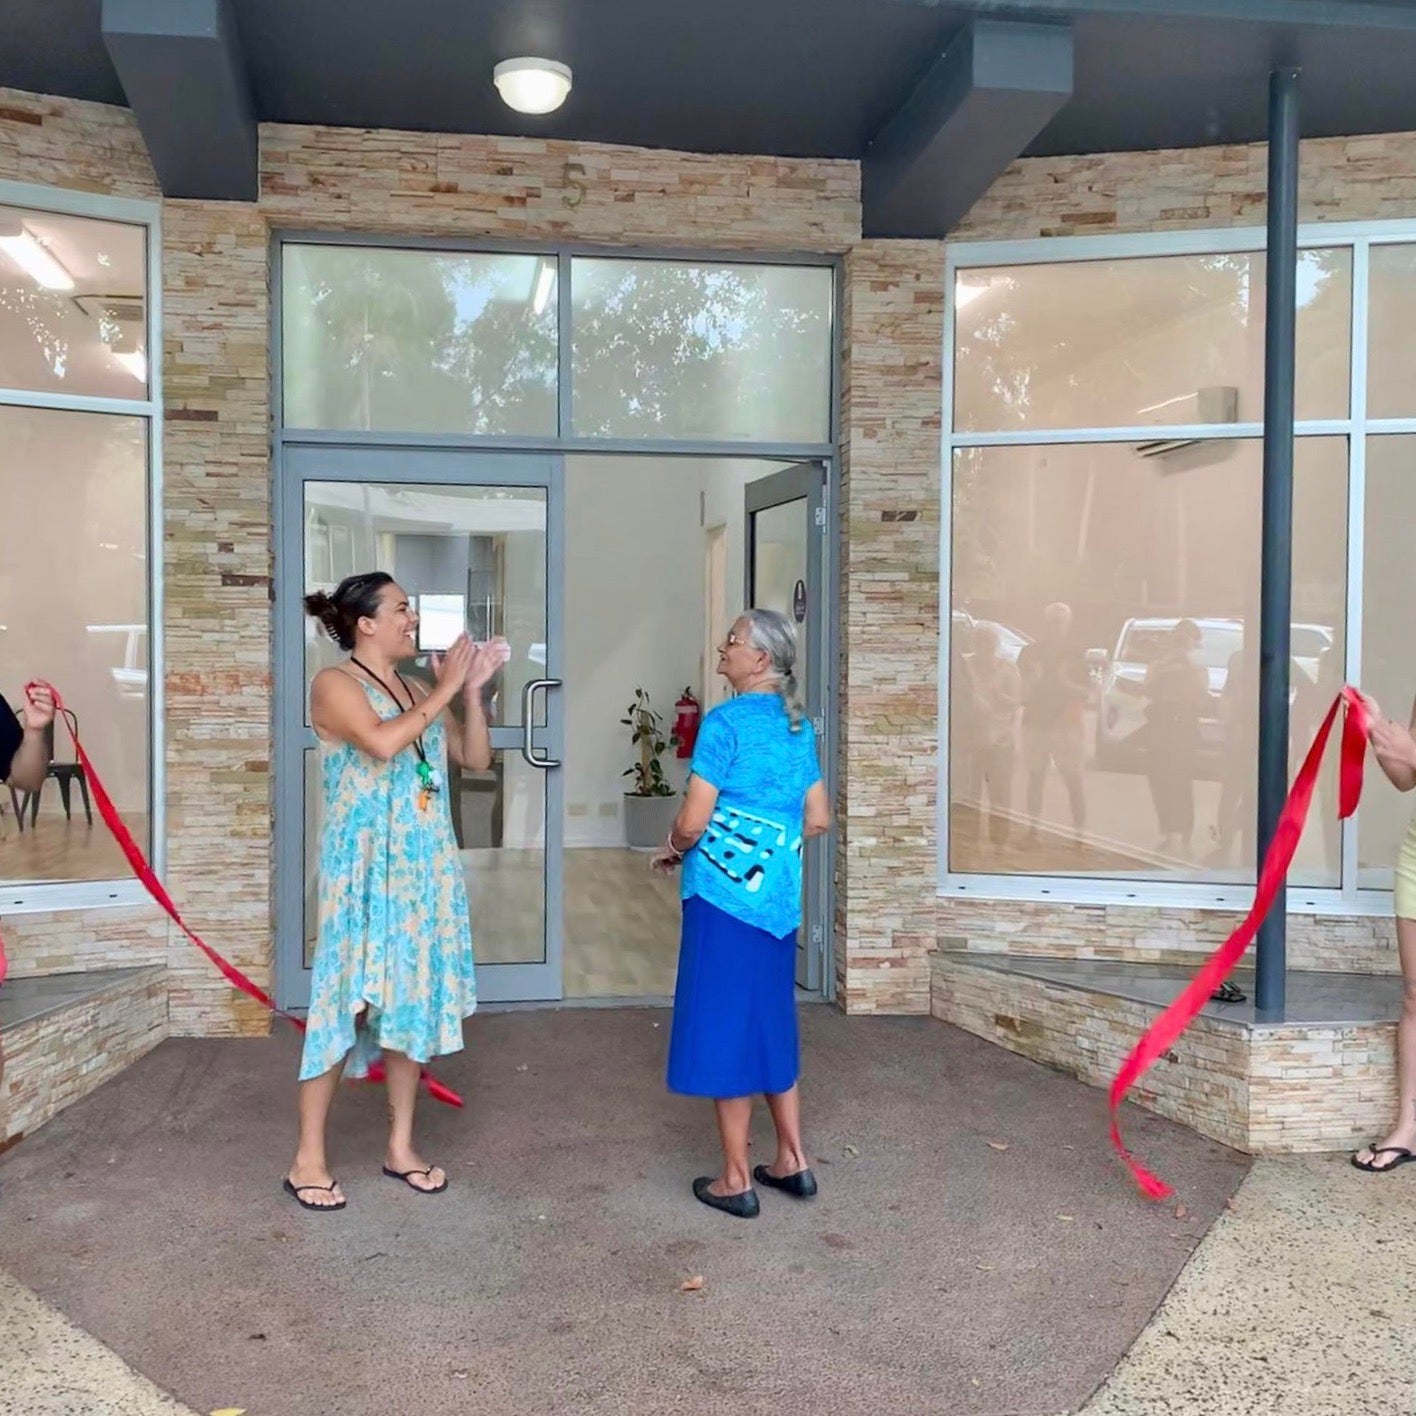 Mililma and Nana Mary smiling and clapping. They are standing in front their community center. Red ribbon is mid fall after being cut. 